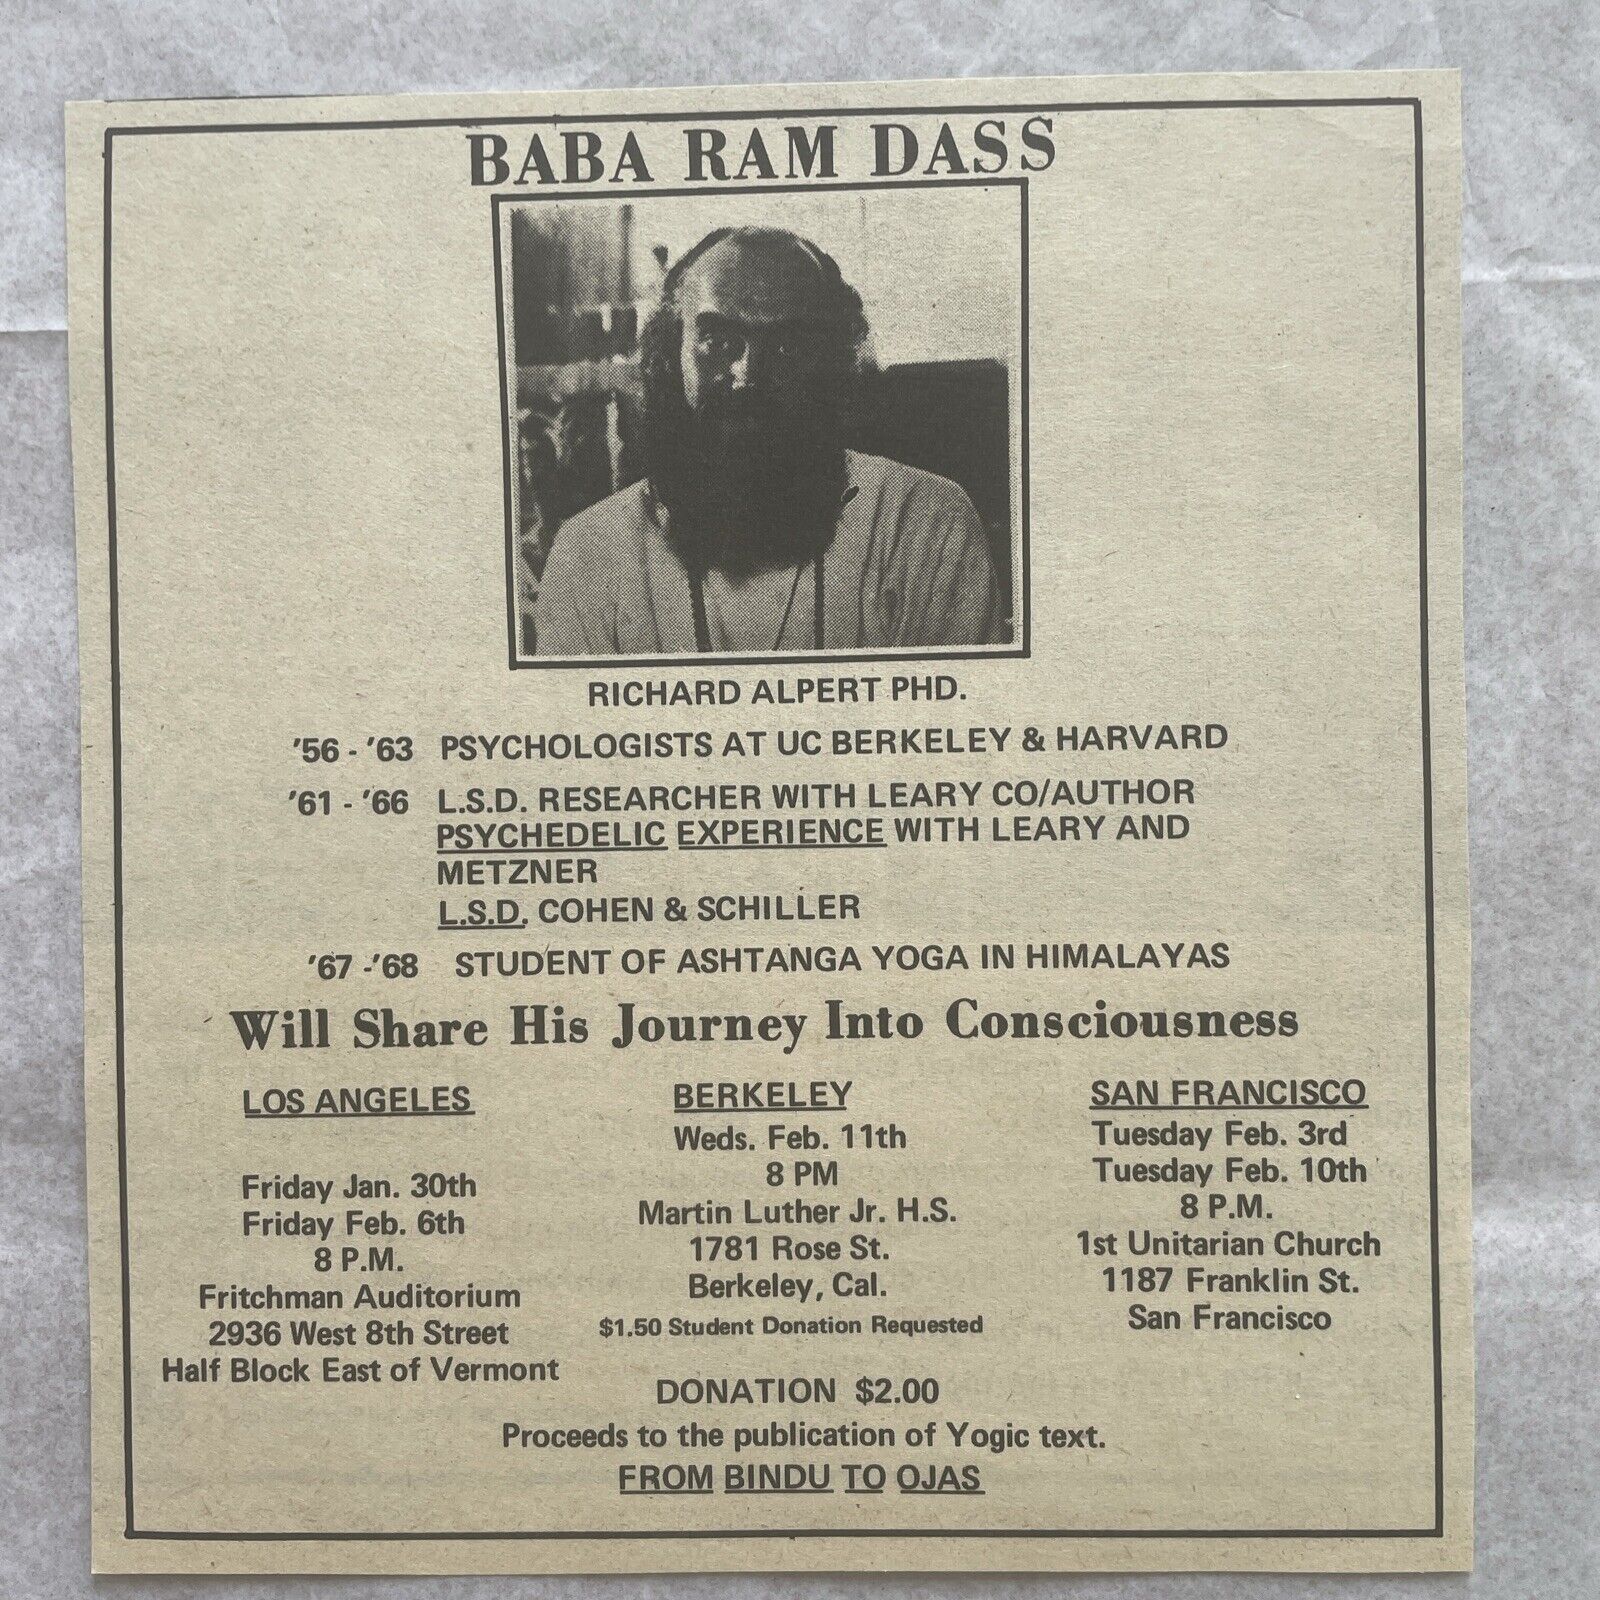 1967 Baba Ram Dass, Shares His Journey Into Consciousness, Lectures Ad